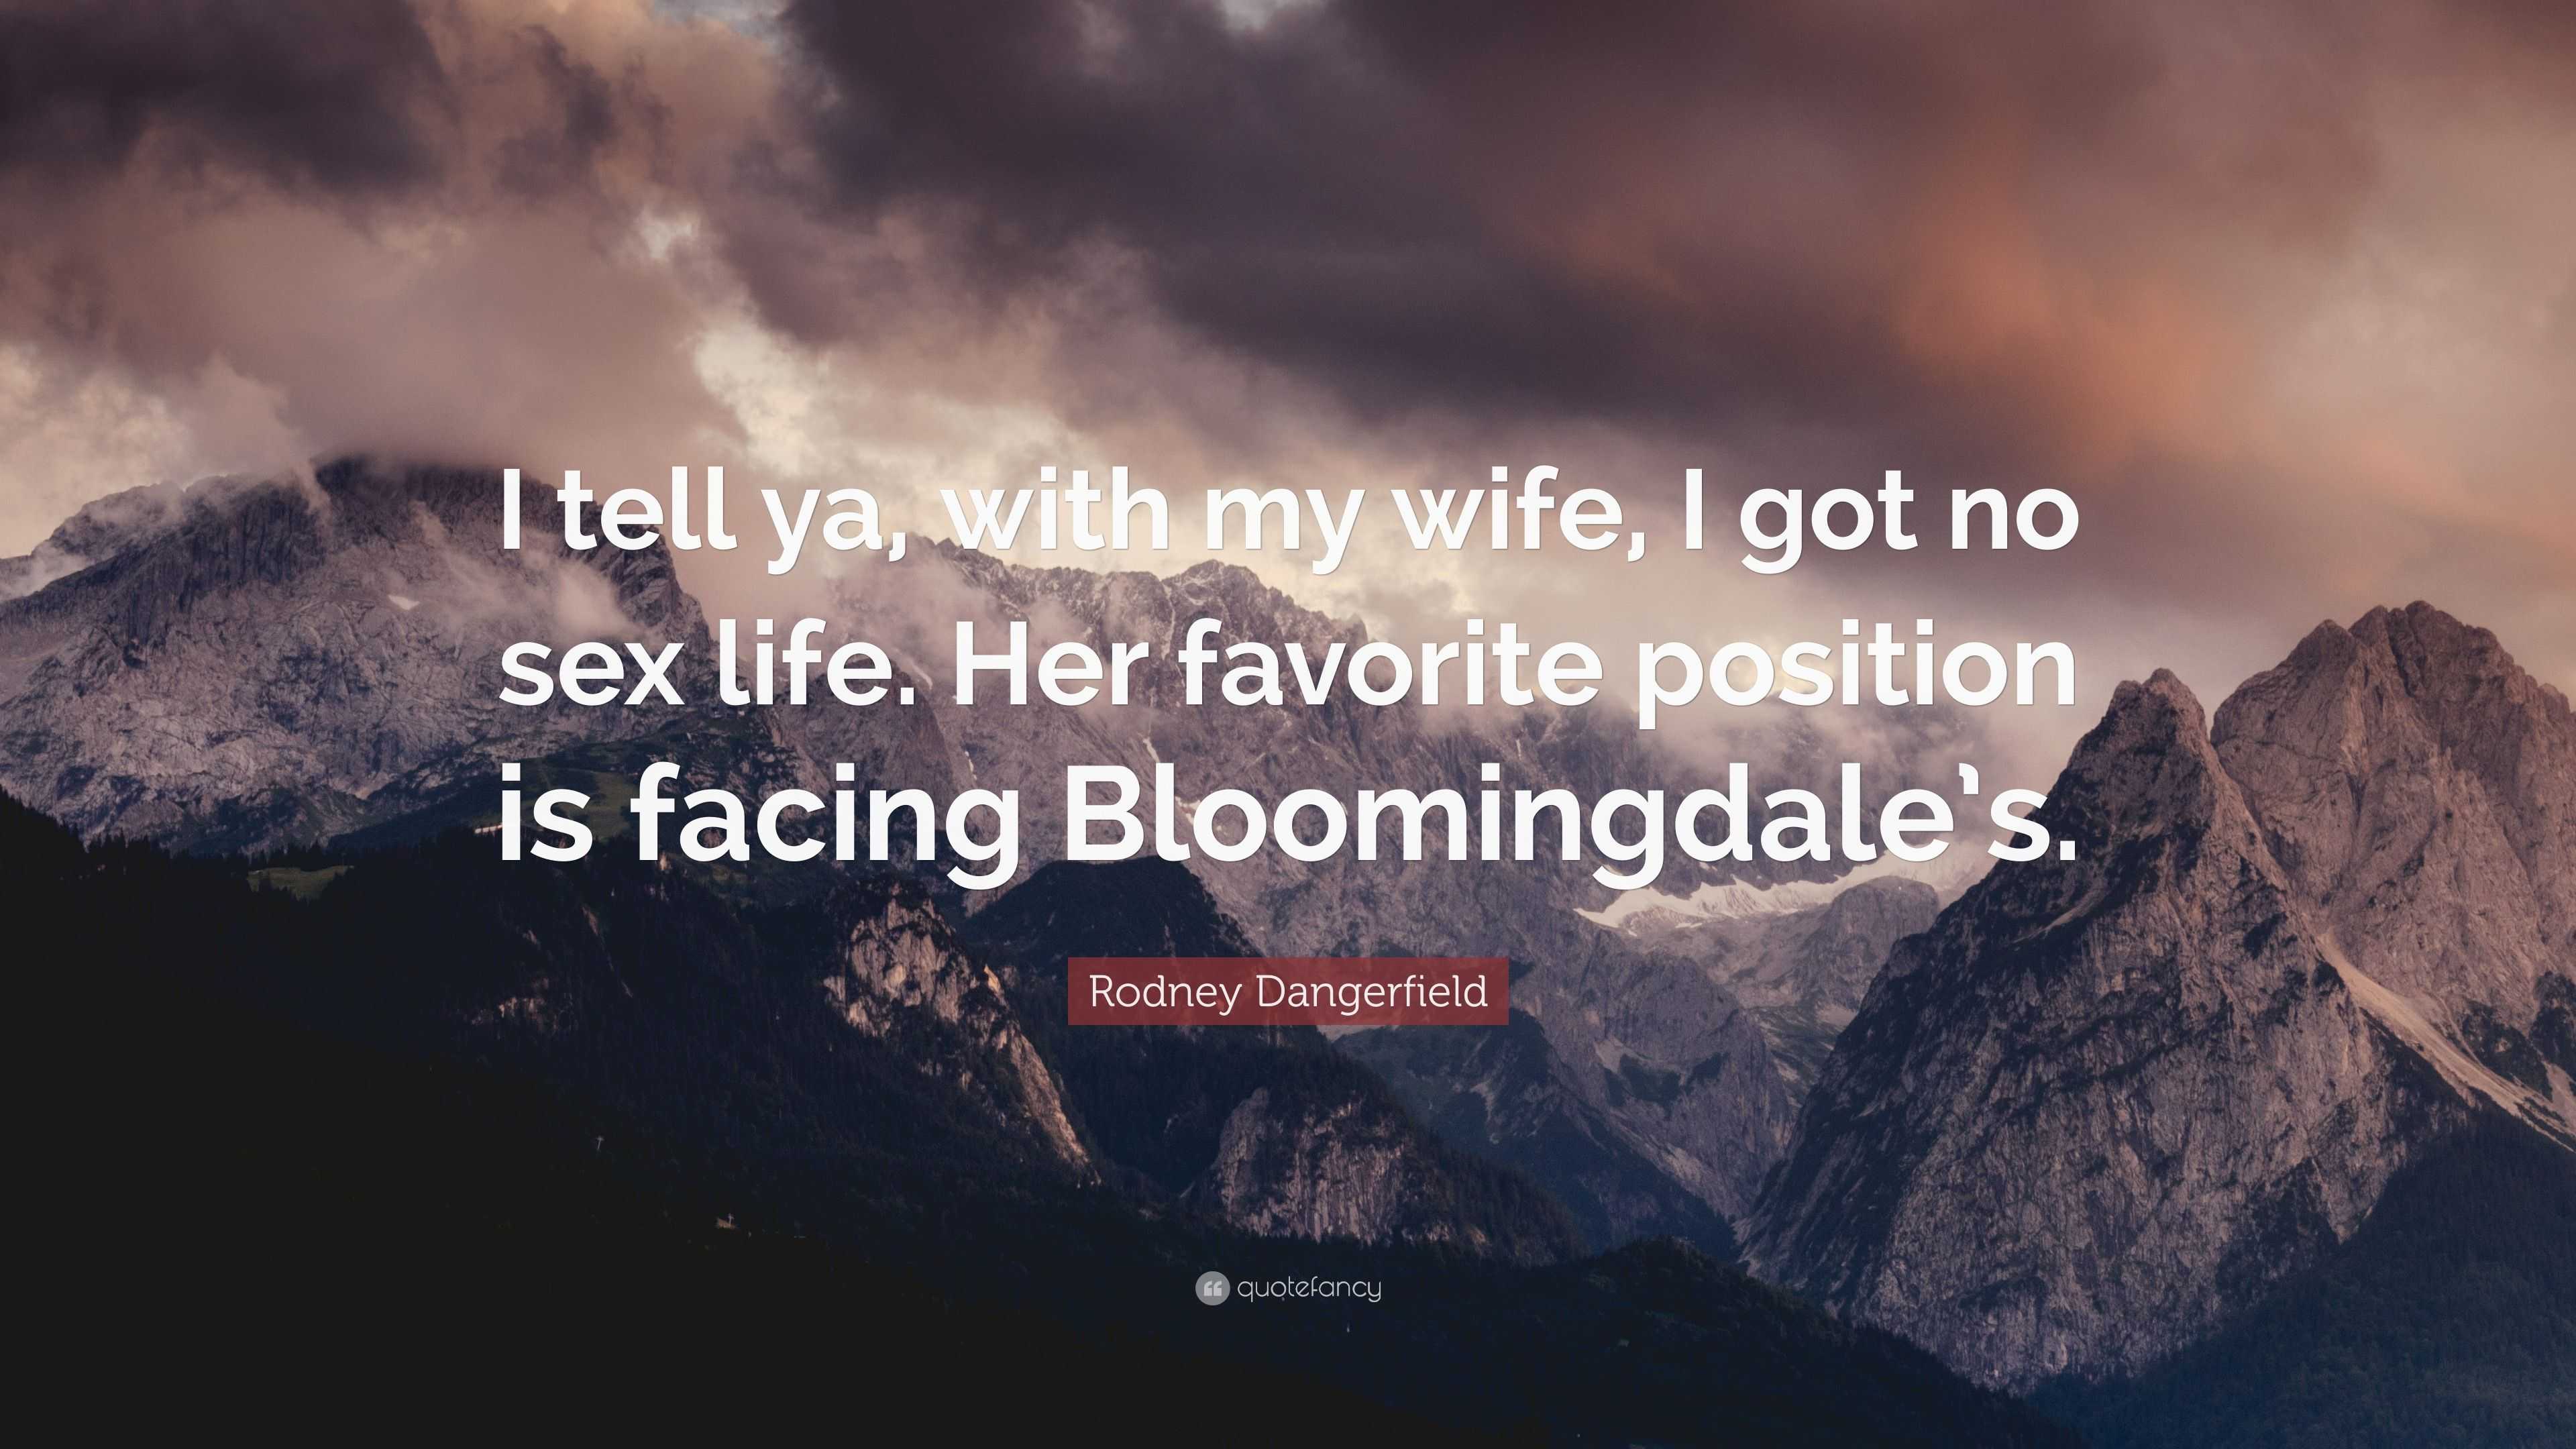 Rodney Dangerfield Quote “I tell ya, with my wife, I got no sex life